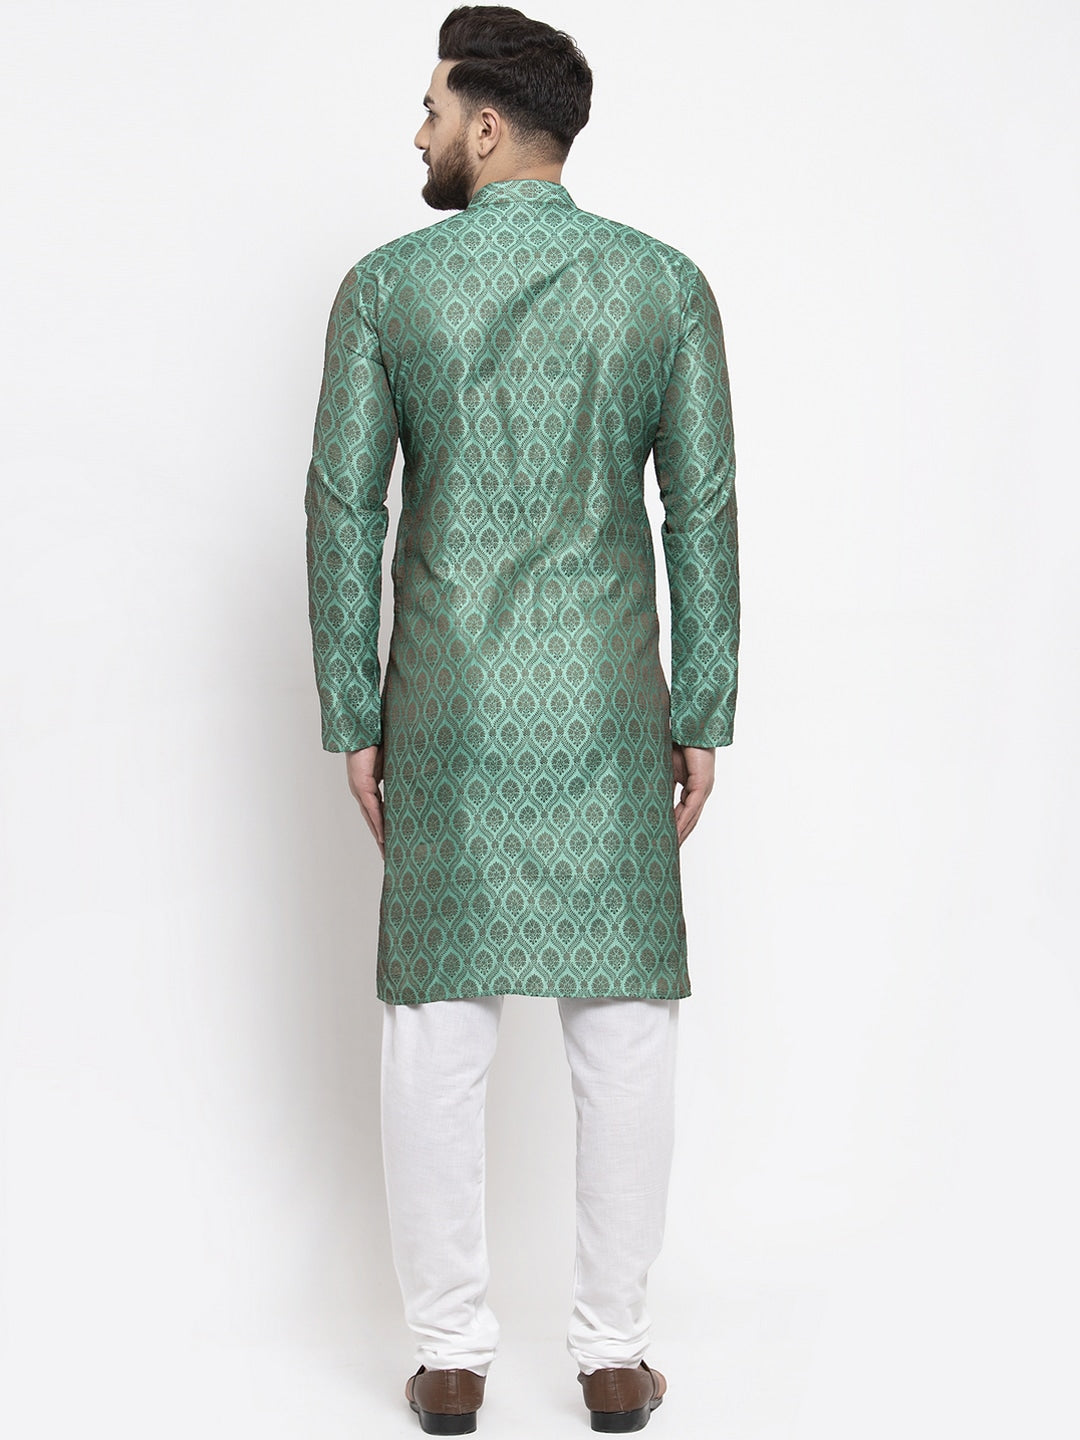 Paste Green Kurta Set Indian Clothing in Denver, CO, Aurora, CO, Boulder, CO, Fort Collins, CO, Colorado Springs, CO, Parker, CO, Highlands Ranch, CO, Cherry Creek, CO, Centennial, CO, and Longmont, CO. NATIONWIDE SHIPPING USA- India Fashion X